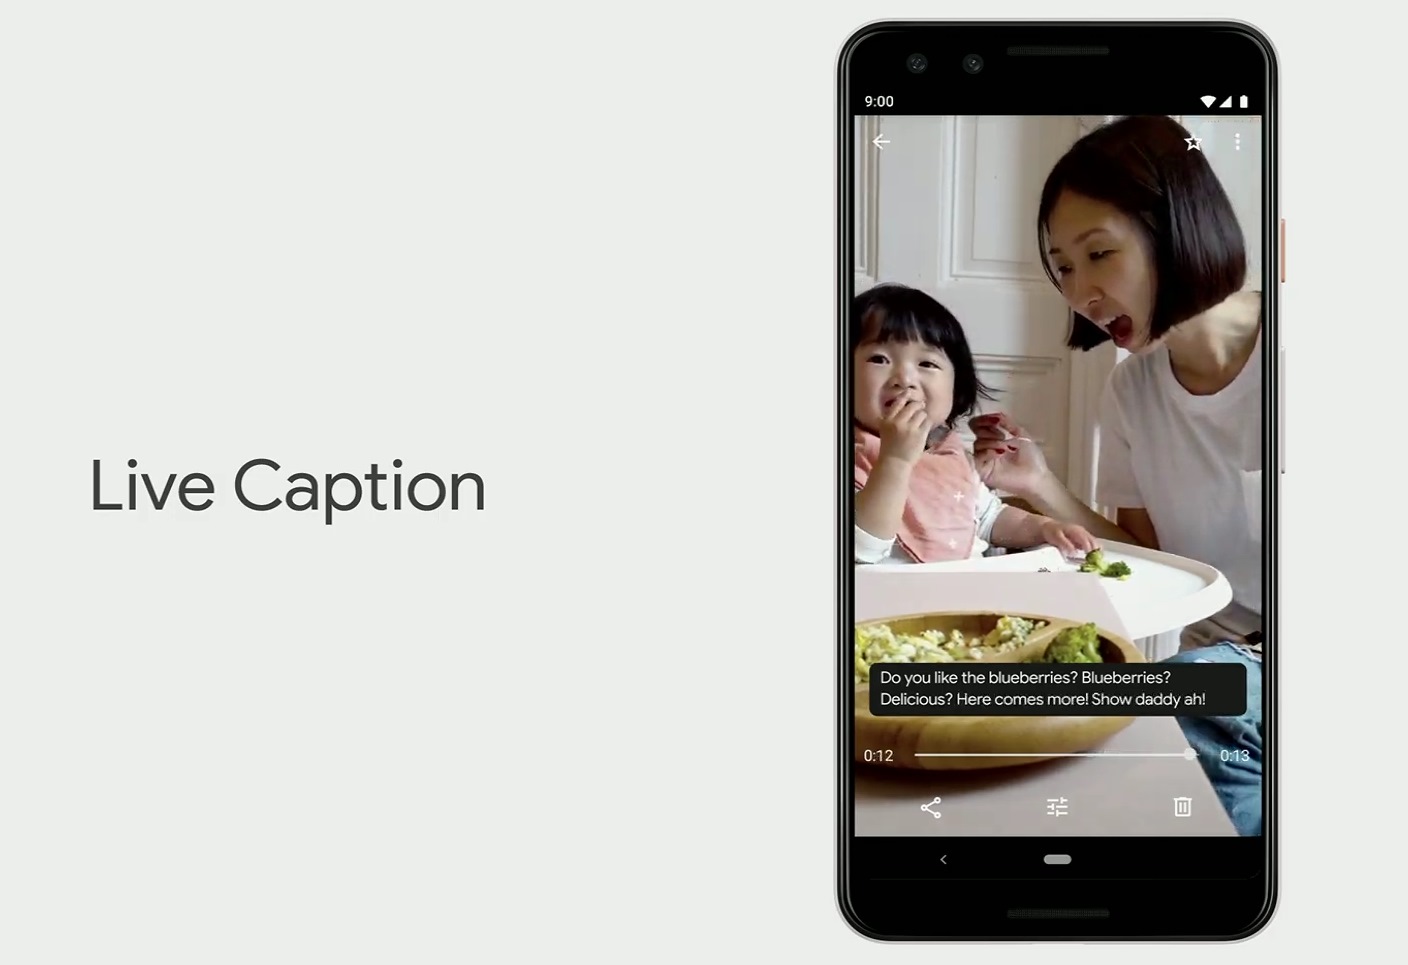 Live transcription and captioning in Android are a boon to the hearing-impaired